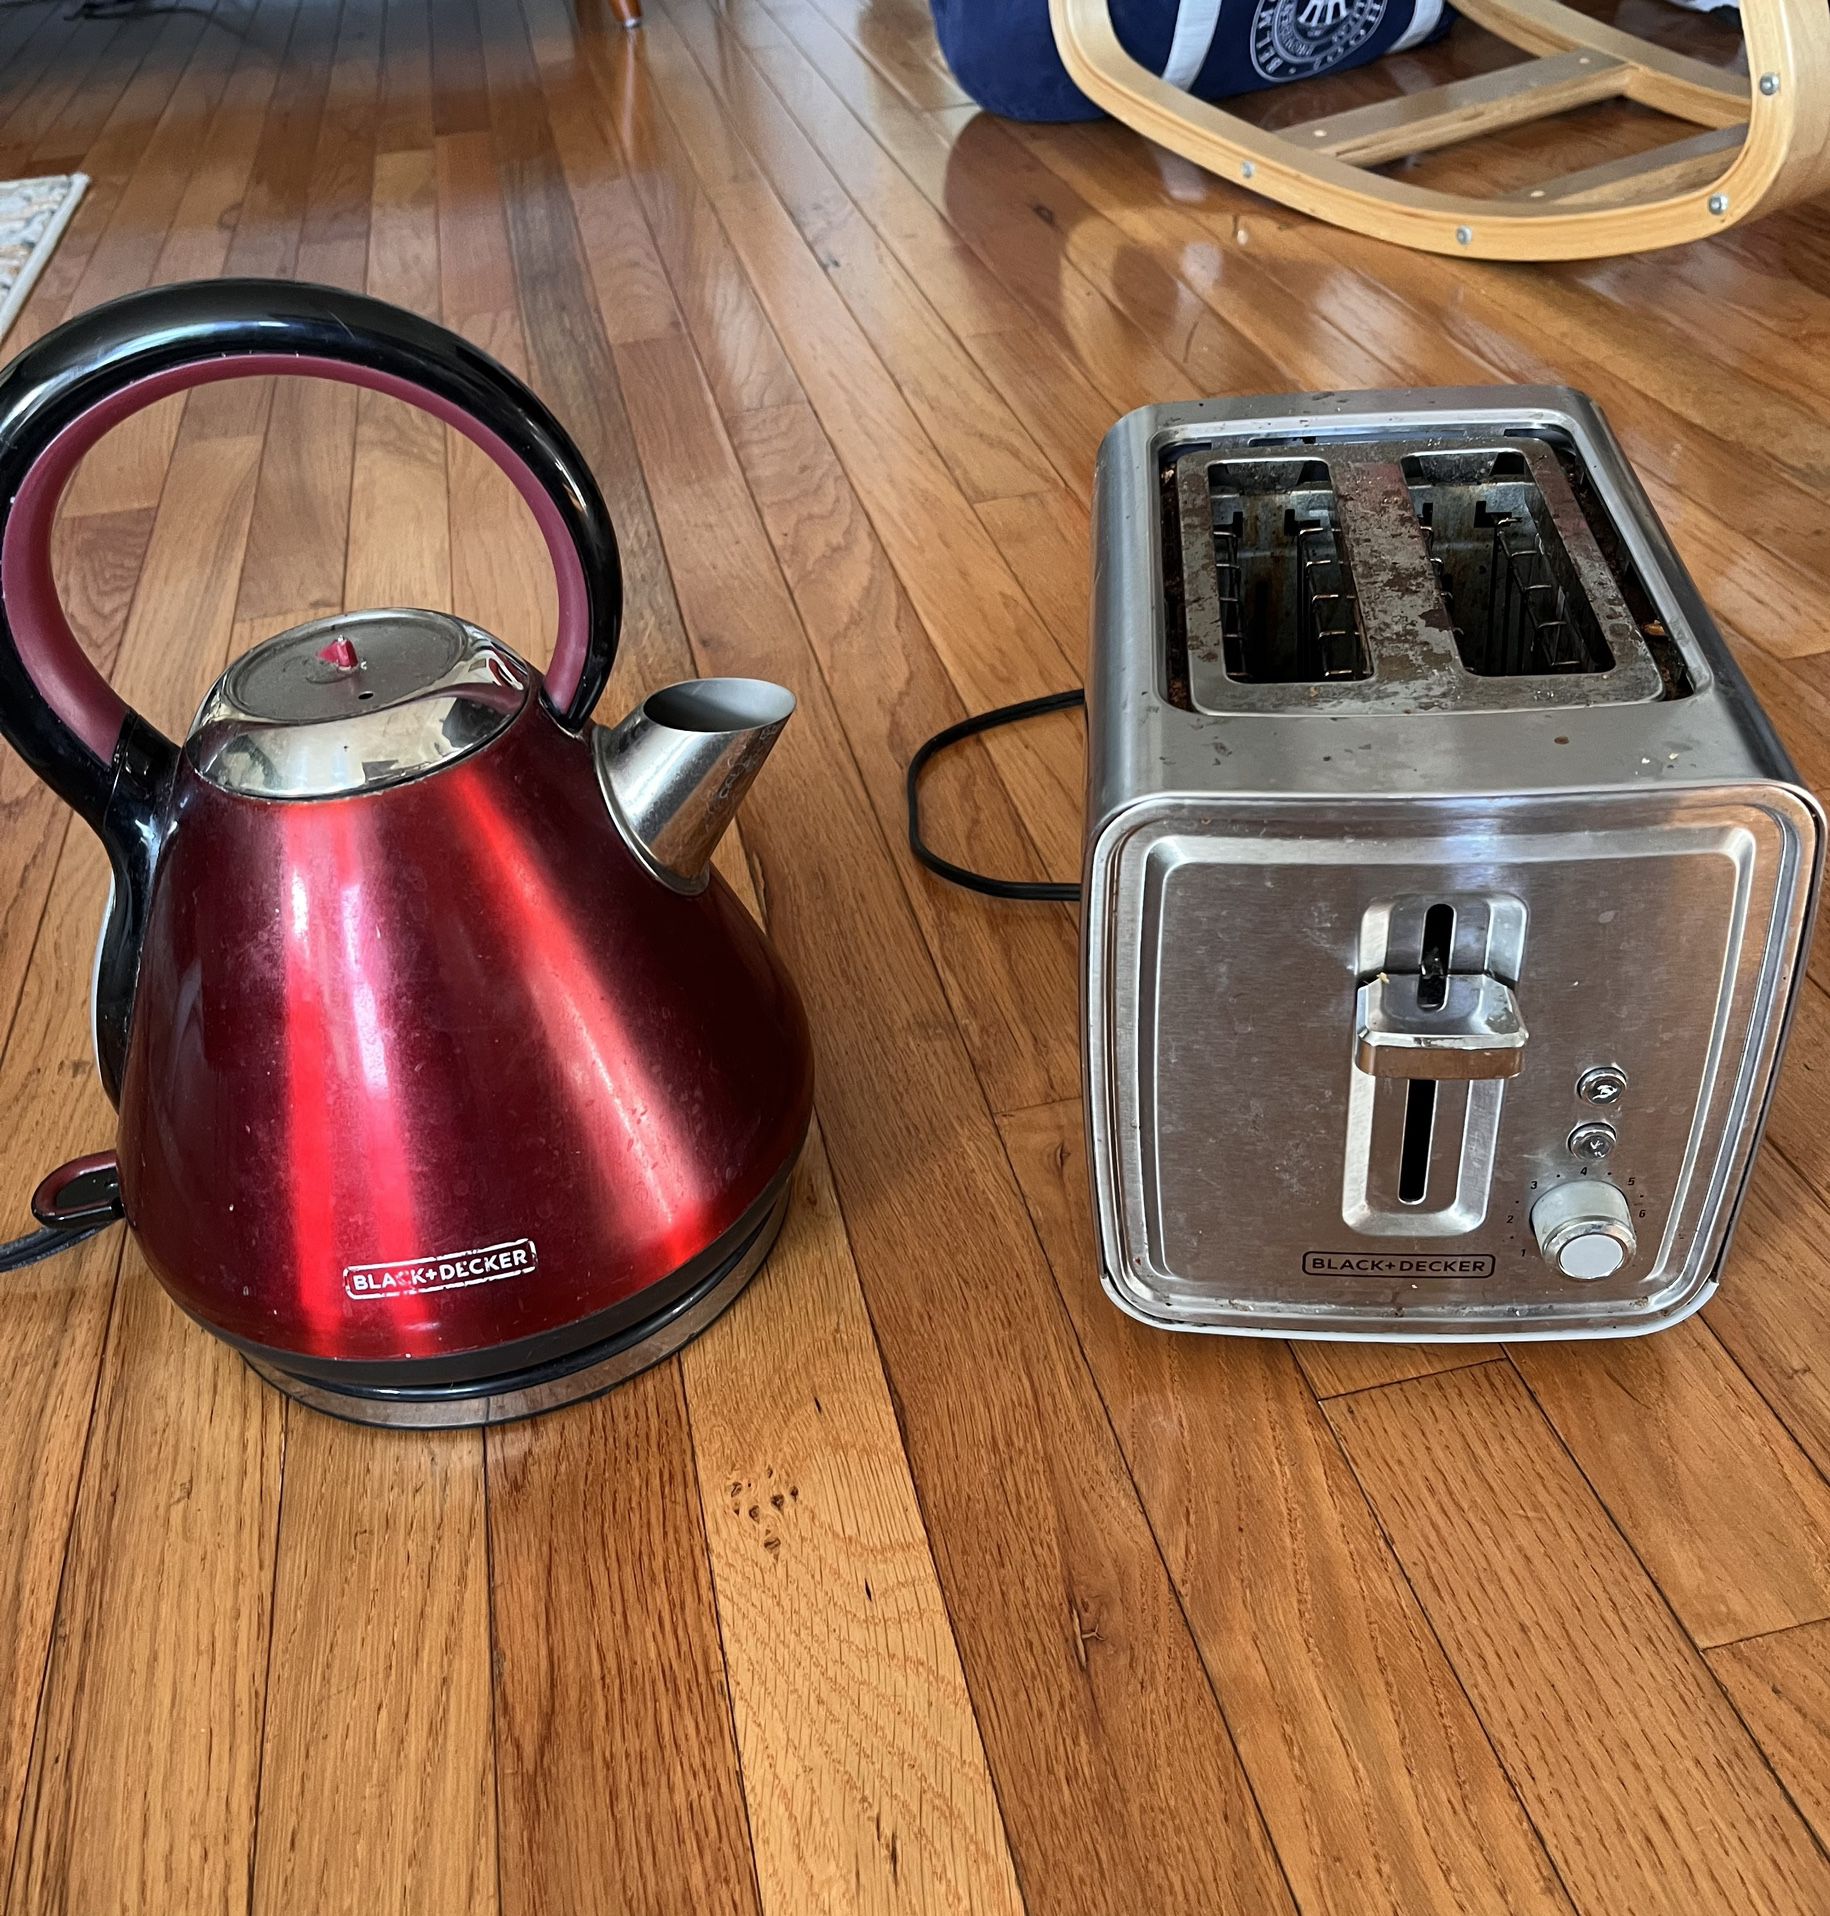 Black & Decker Toaster and Electric Water Heater/Tea Kettle